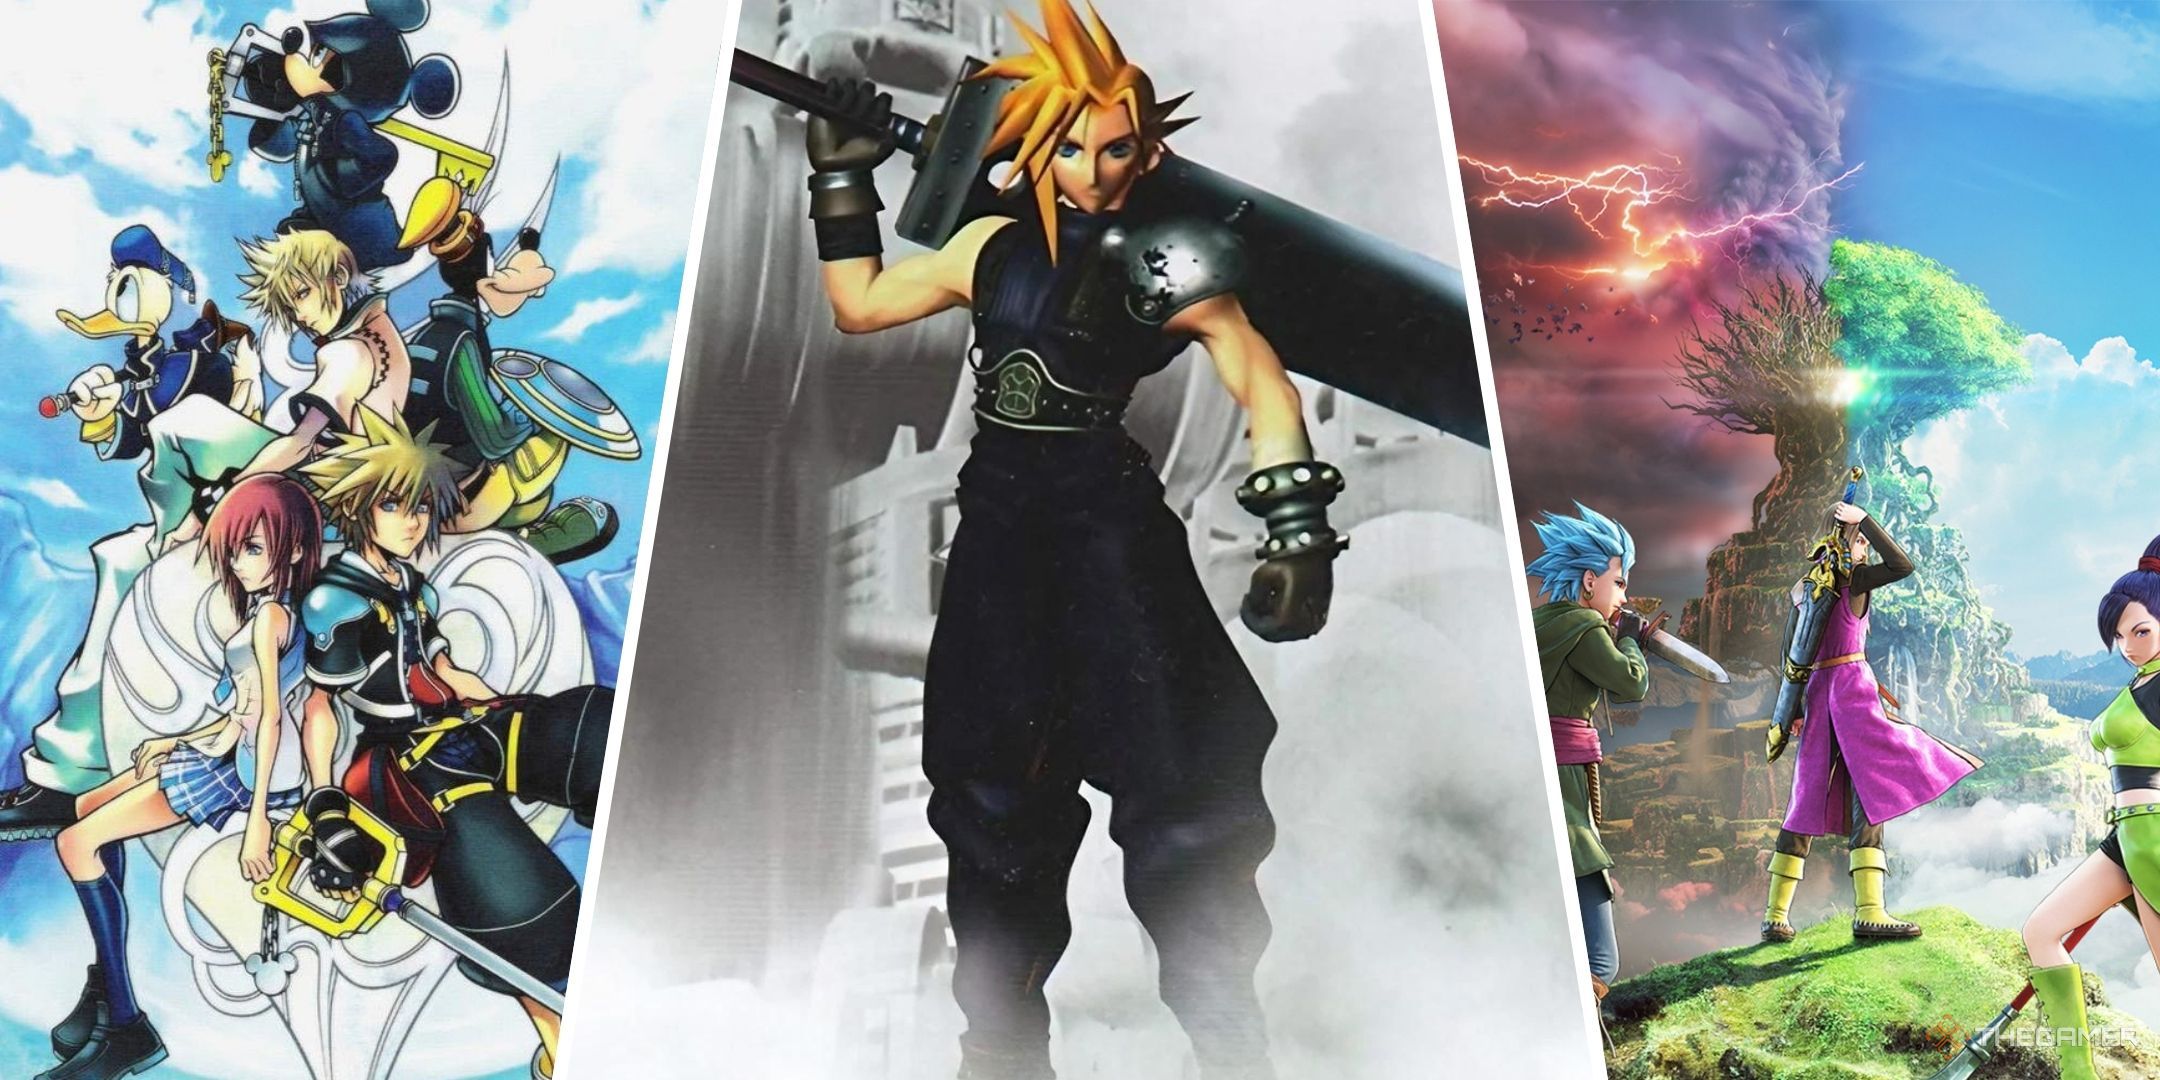 Split images of Kingdom Hearts 2, Final Fantasy 7, and Dragon Quest 11.